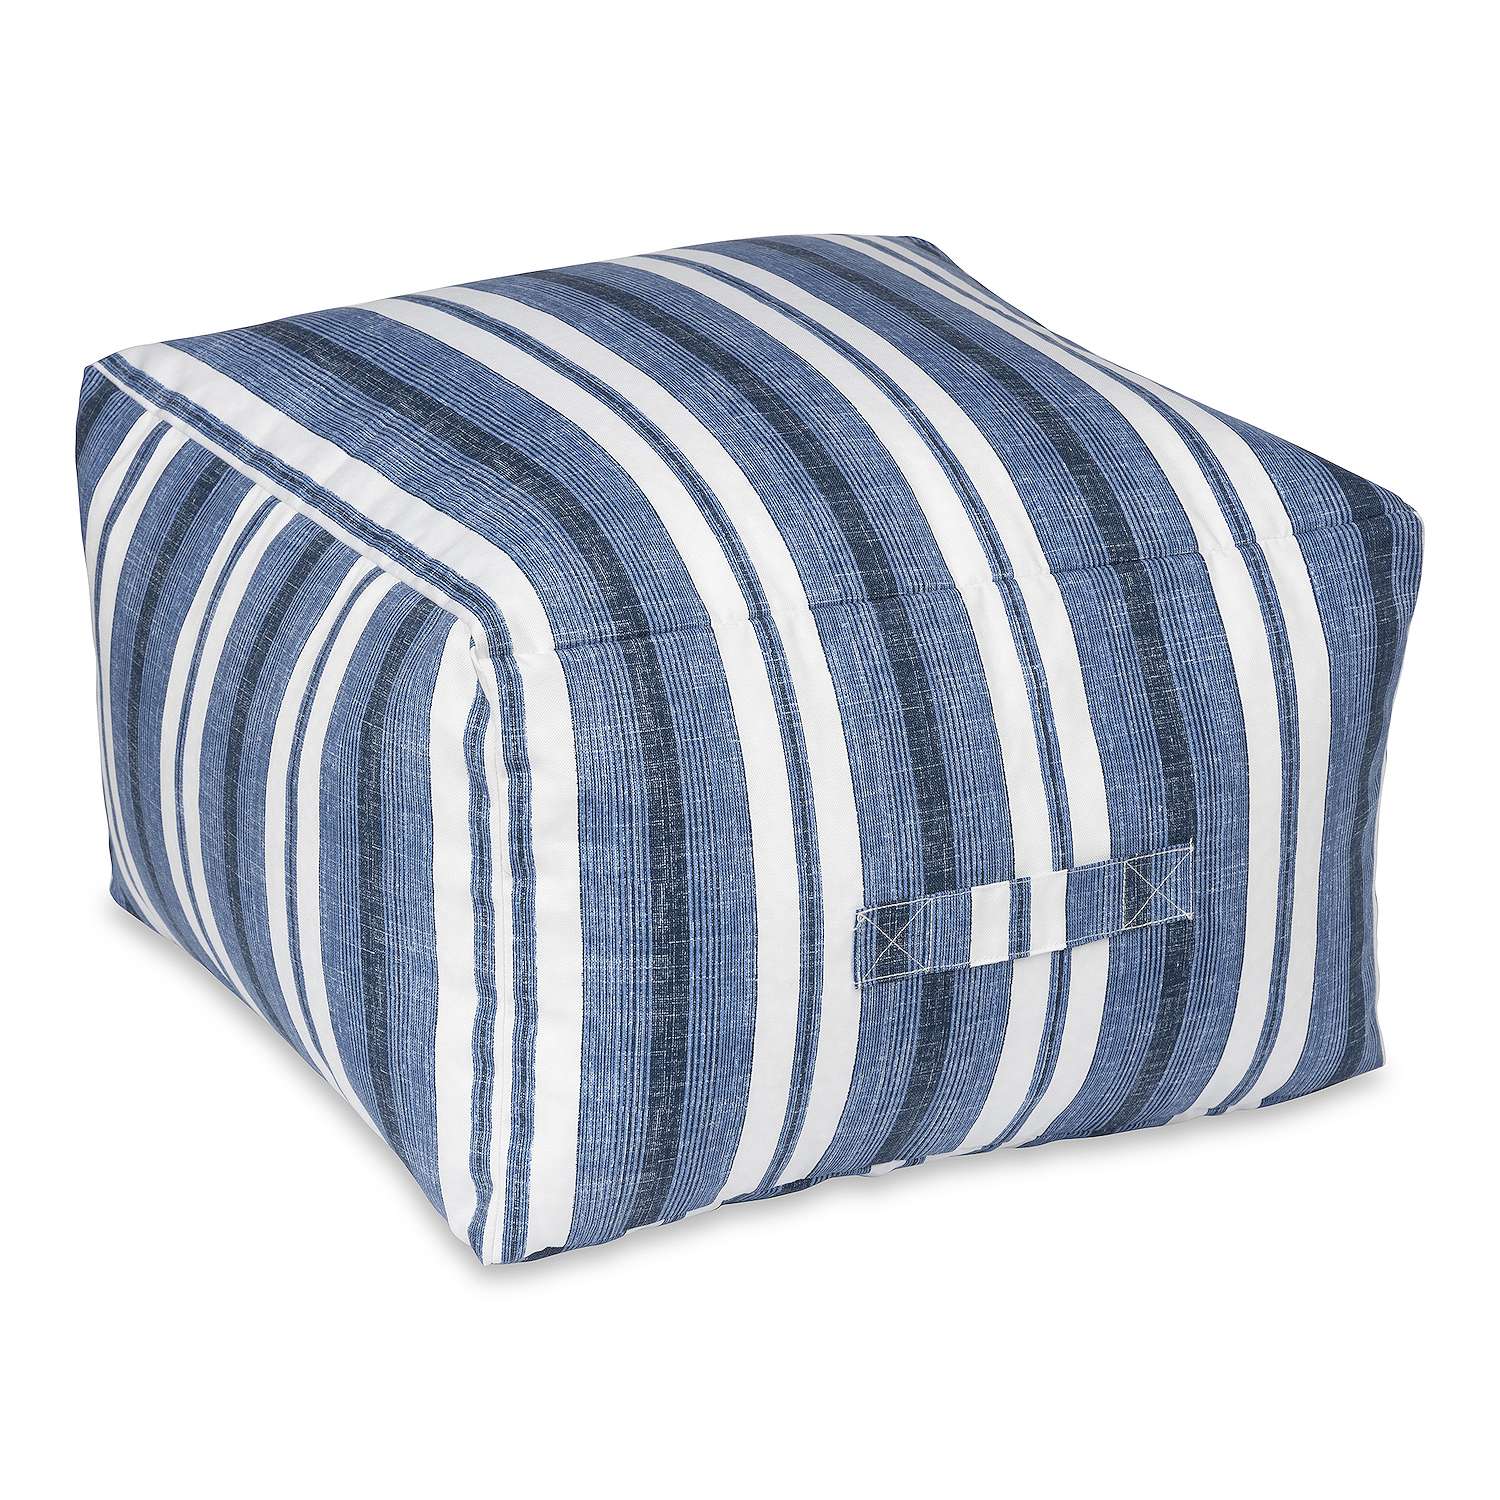 Sonoma Goods For Life Indoor Outdoor Square Pouf Ottoman (Various) $26.17 + F/S on Orders $49+